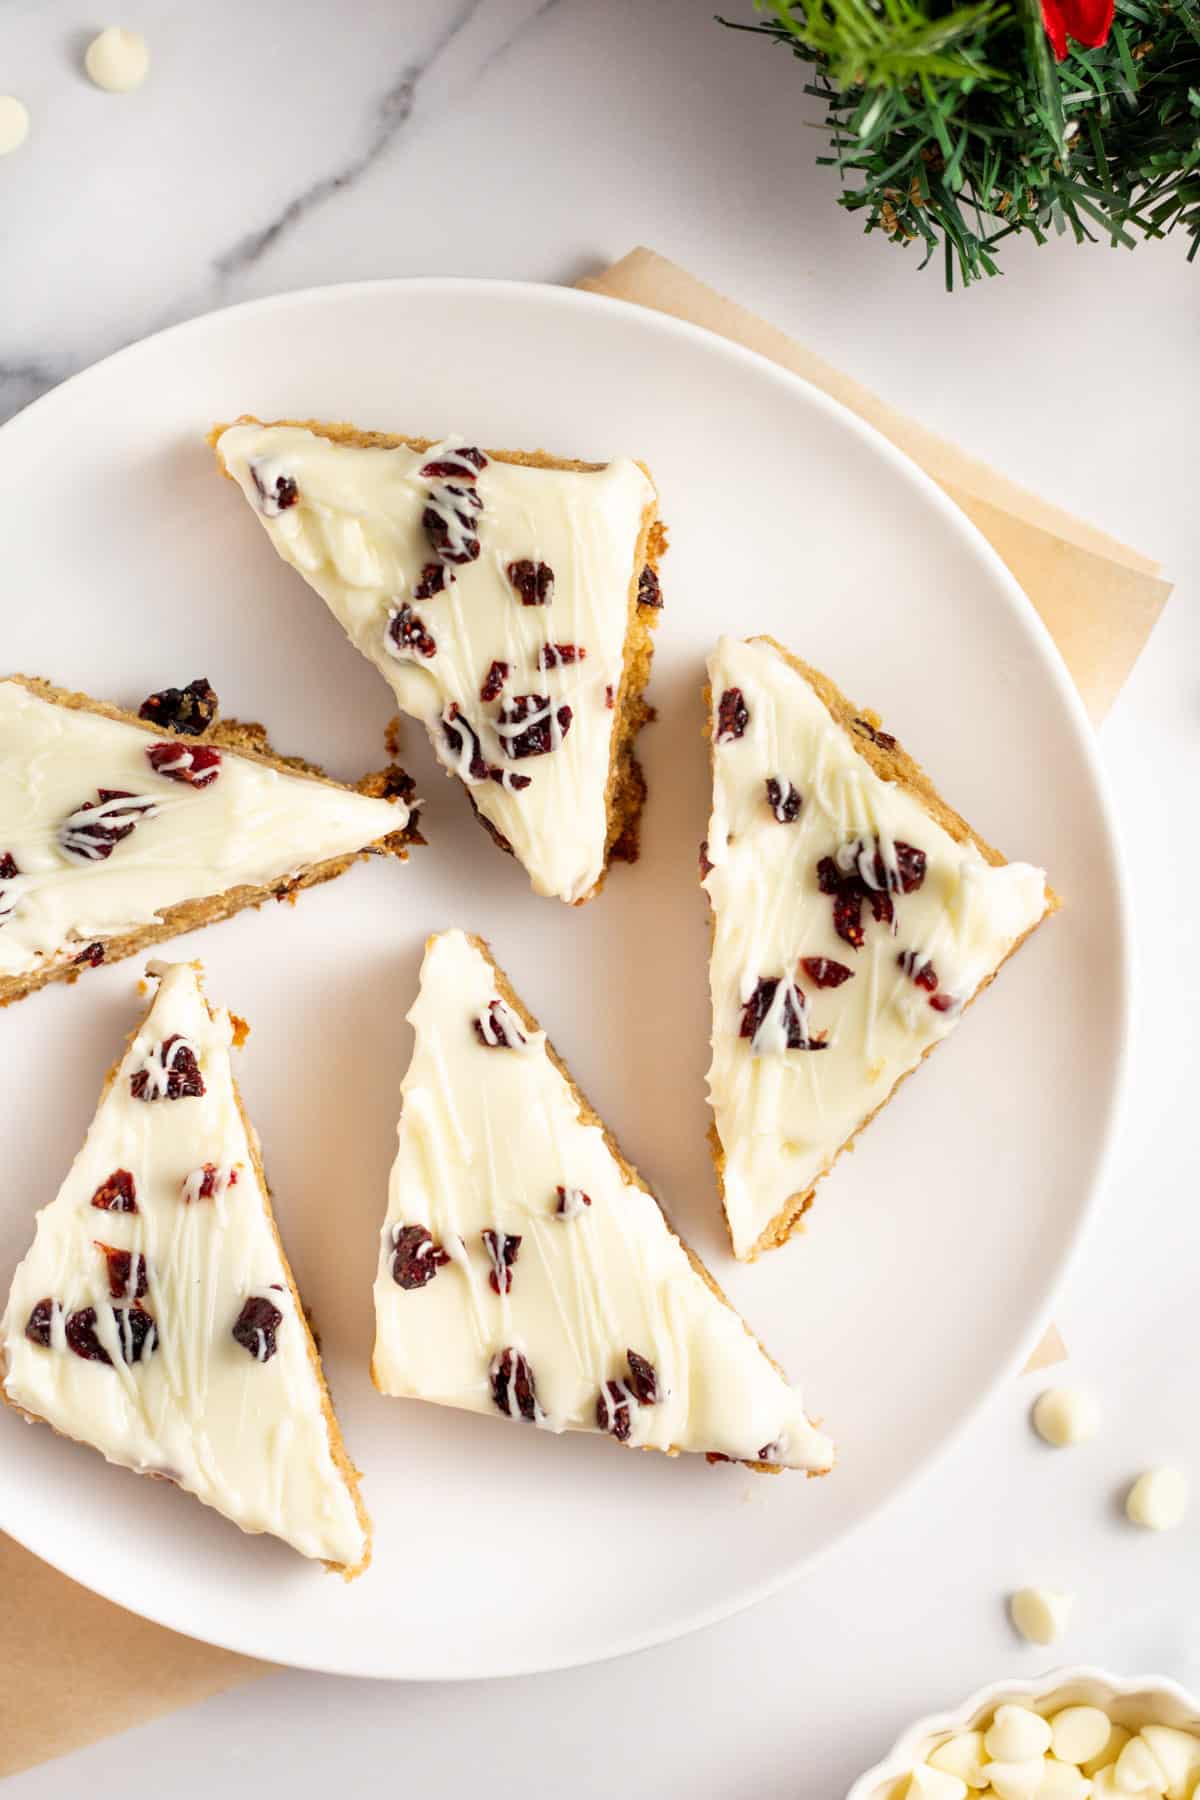 cranberry bliss bars cut into triangles served on a white plate.